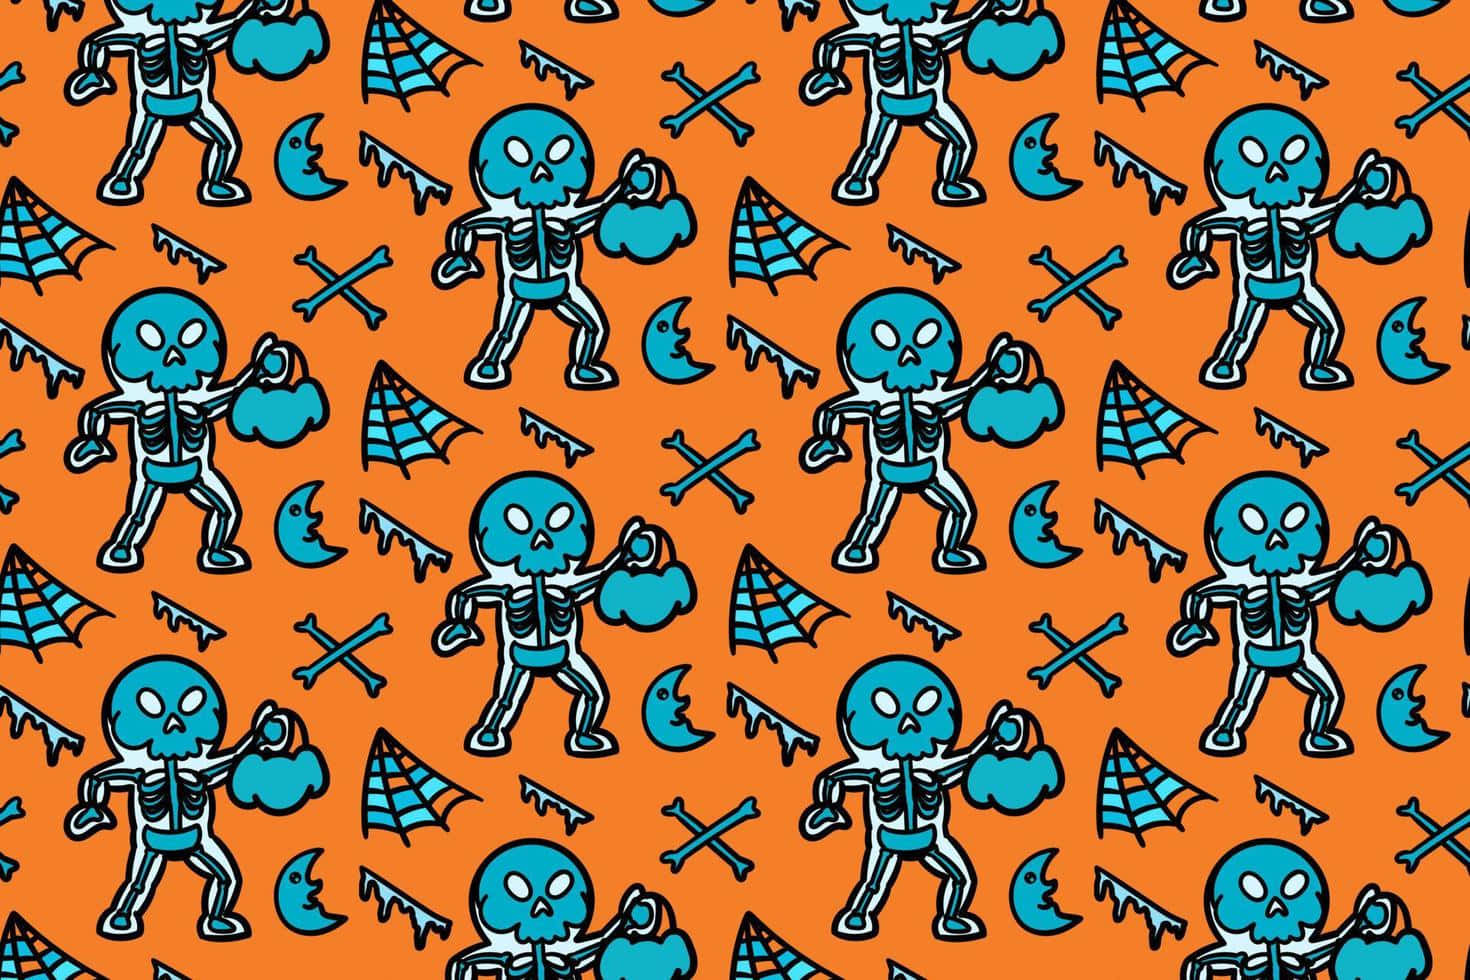 Show off your spooky side this Halloween with a skeleton costume! Wallpaper